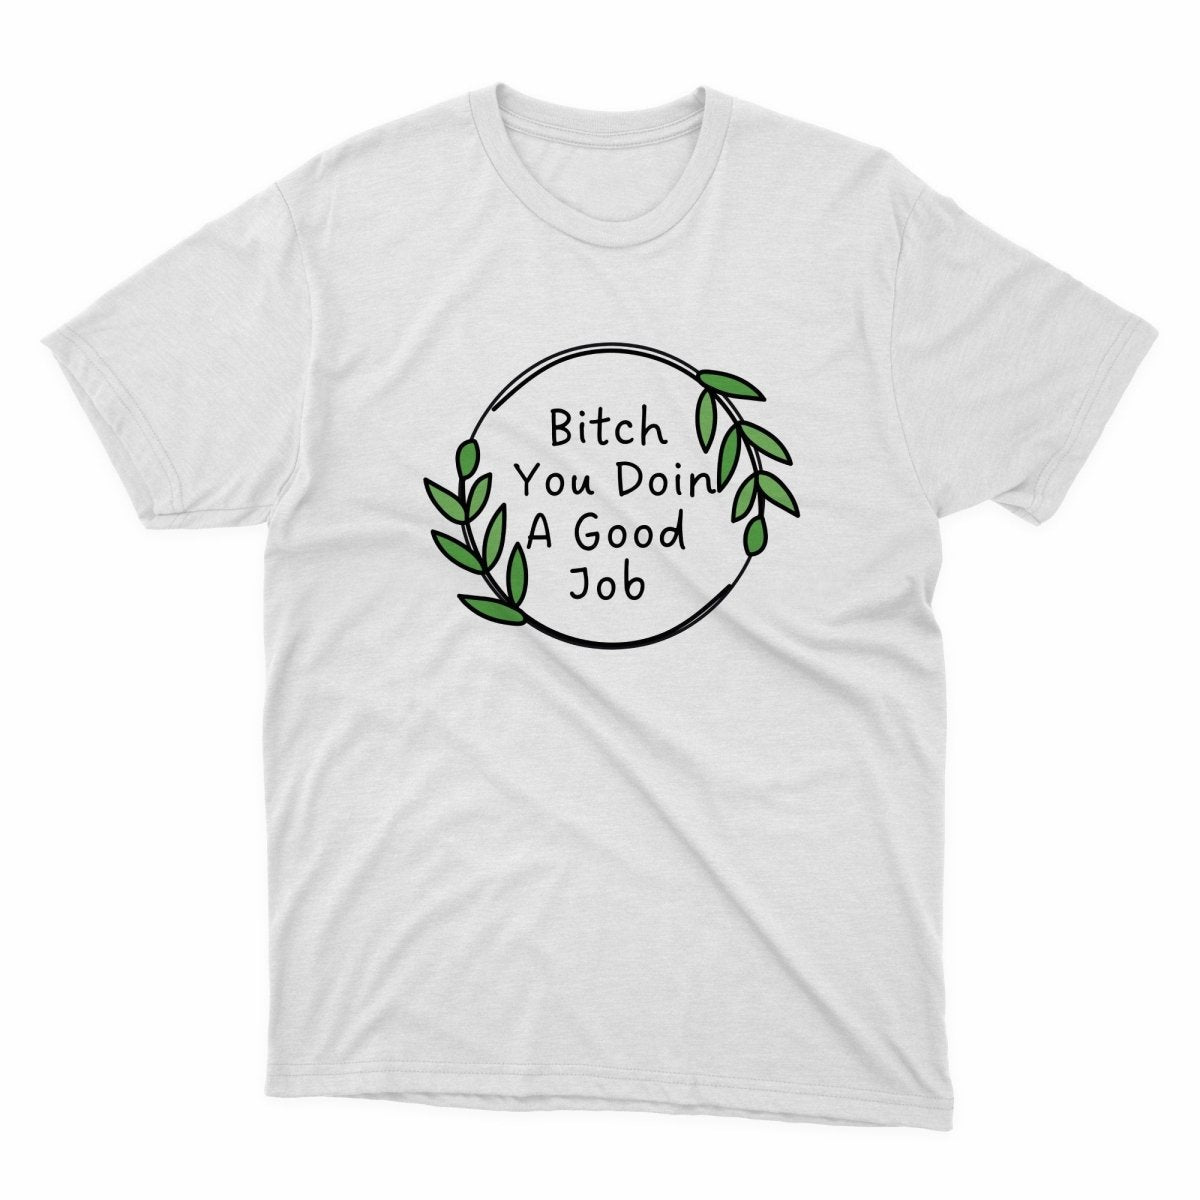 Bitch You Doing A Good Job Shirt - stickerbullBitch You Doing A Good Job ShirtShirtsPrintifystickerbull84793585259616889840WhiteSa white t - shirt with the words bitch you doin't a good job